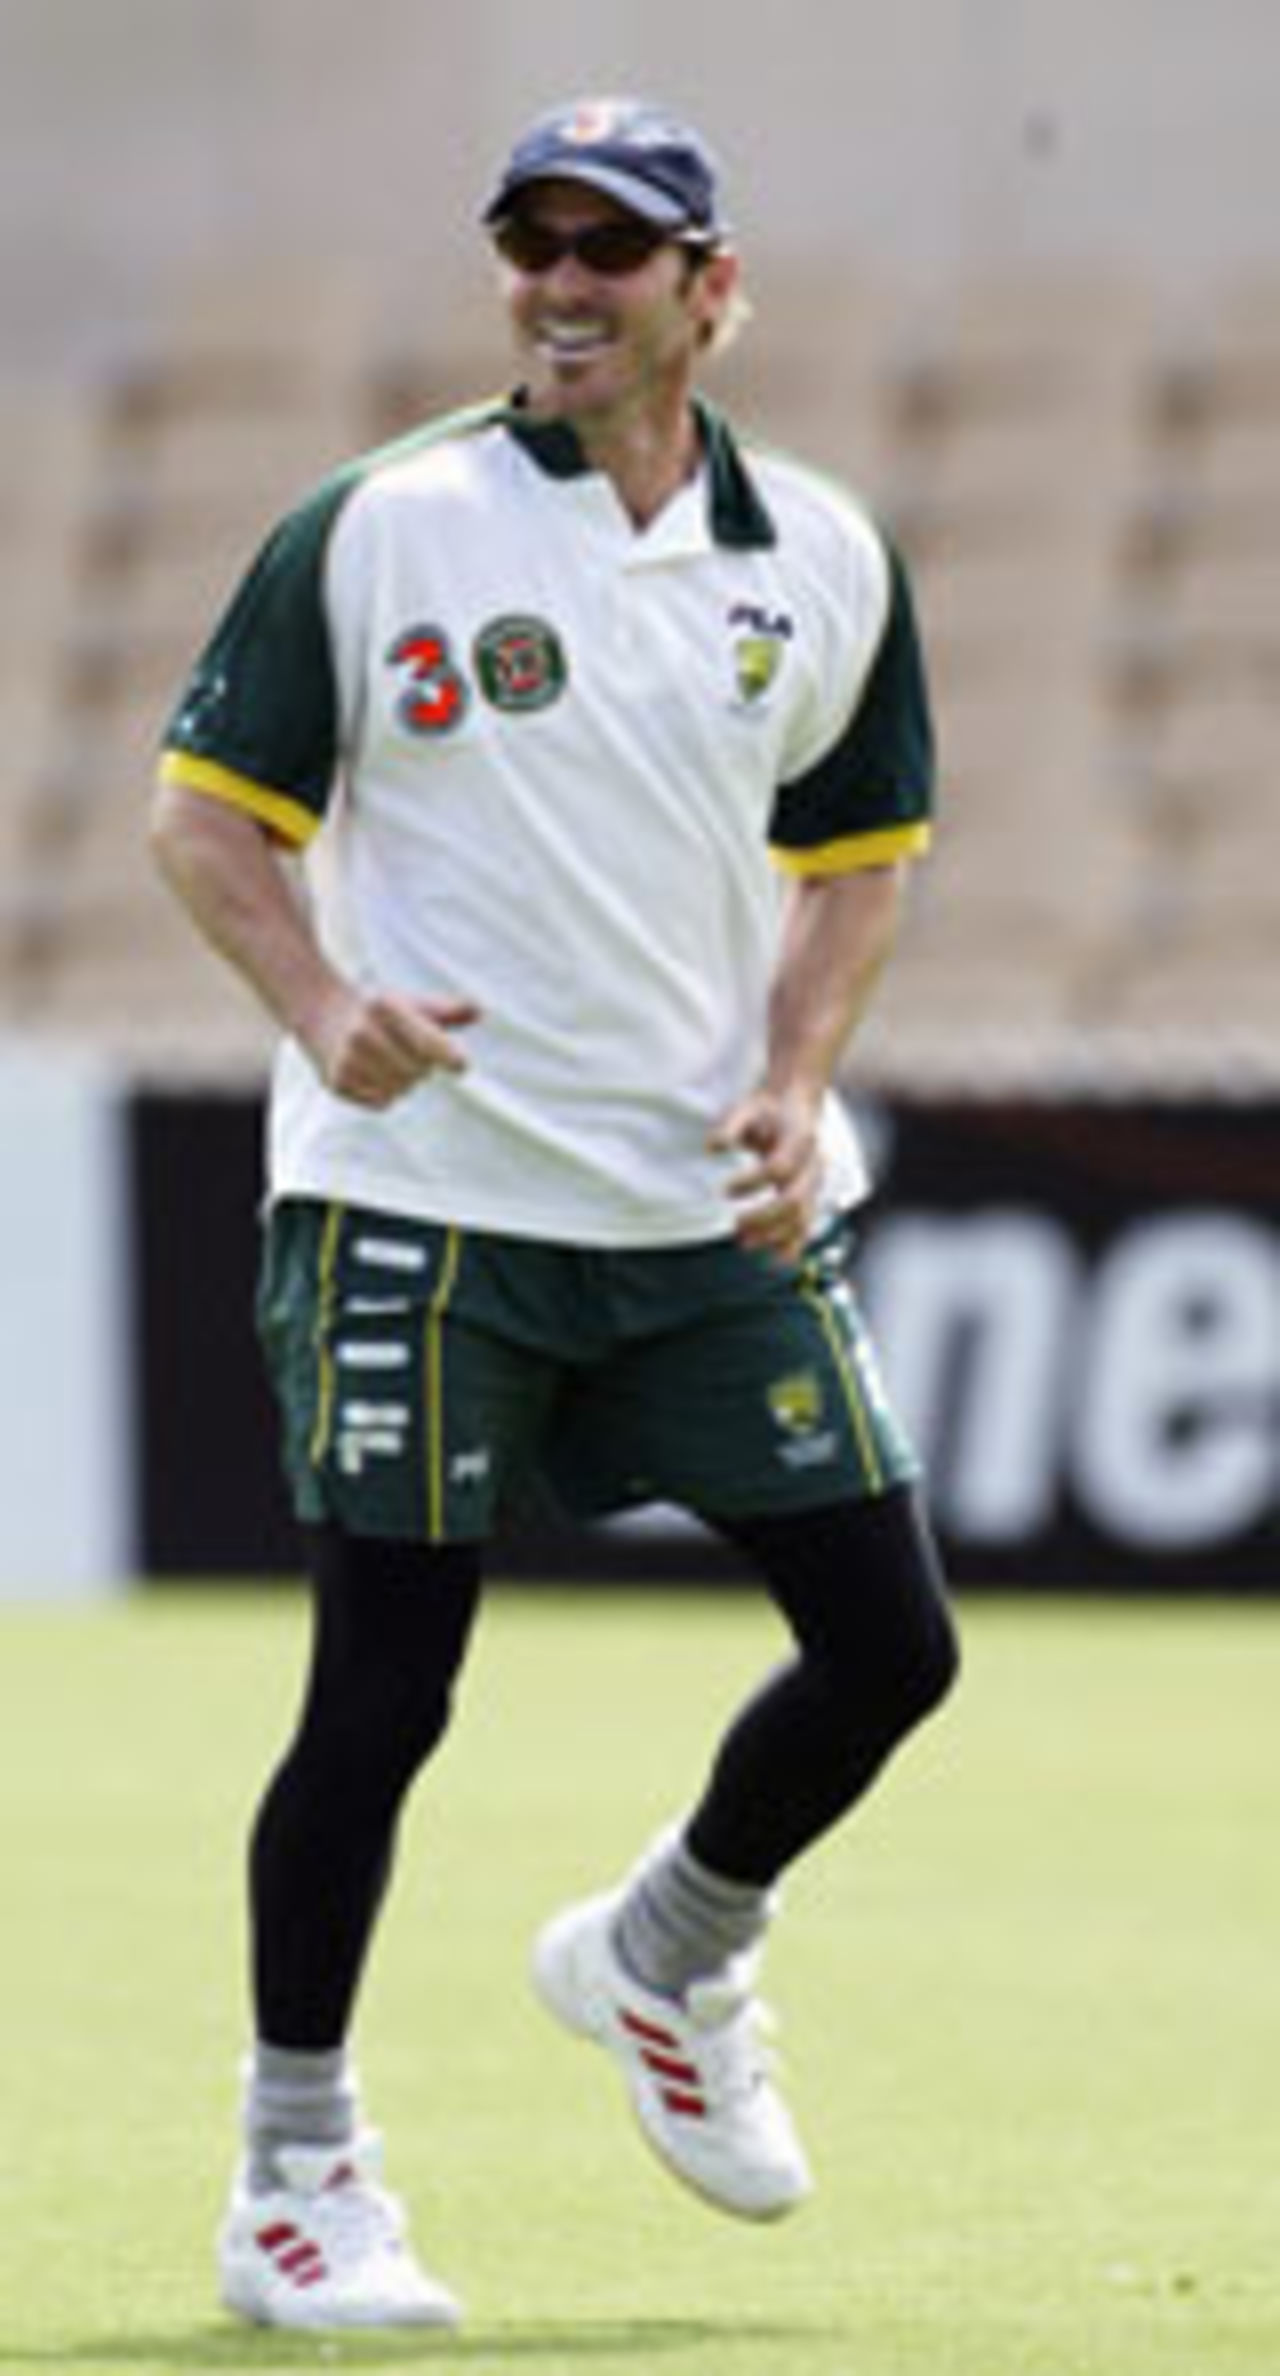 Damien Martyn training at the Adelaide Oval, December 10, 2003